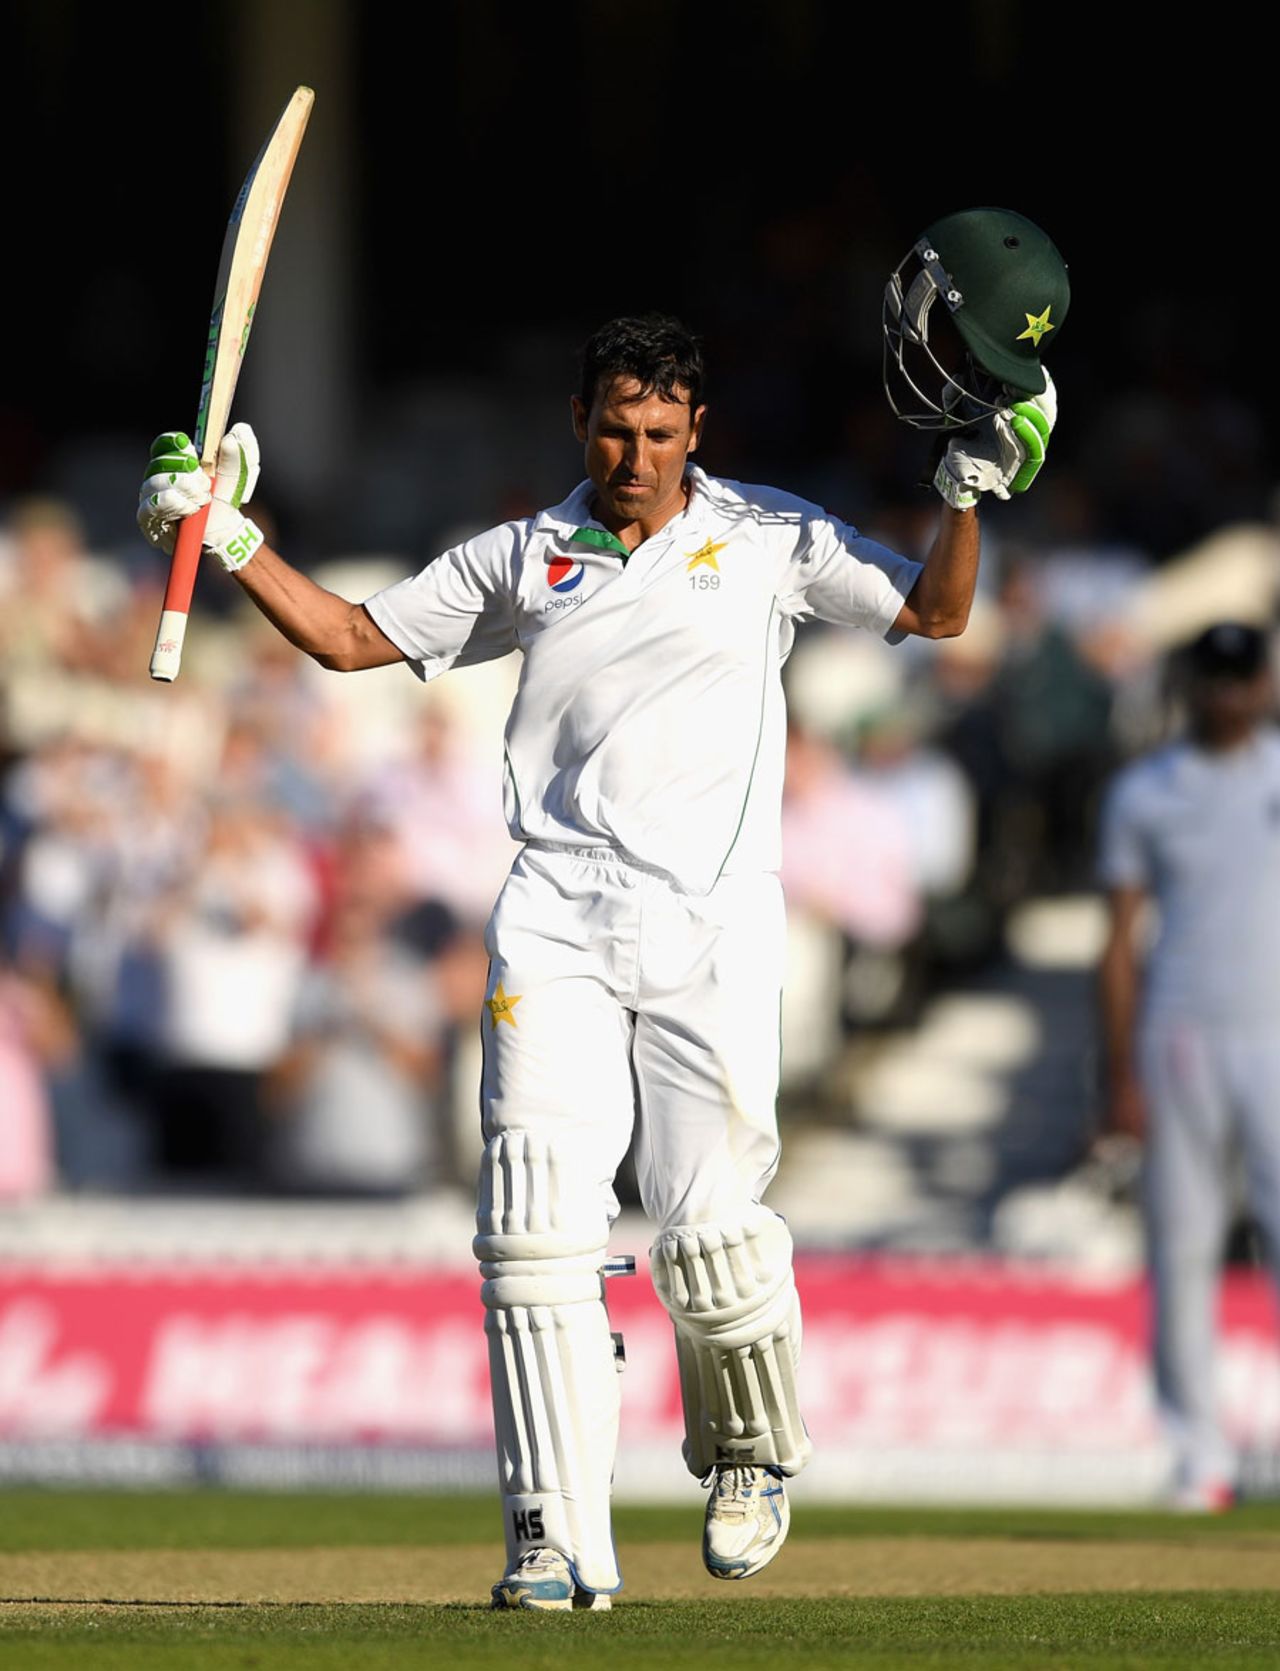 Younis Khan takes the applause for his century, England v Pakistan, 4th Test, The Oval, 2nd day, August 12, 2016